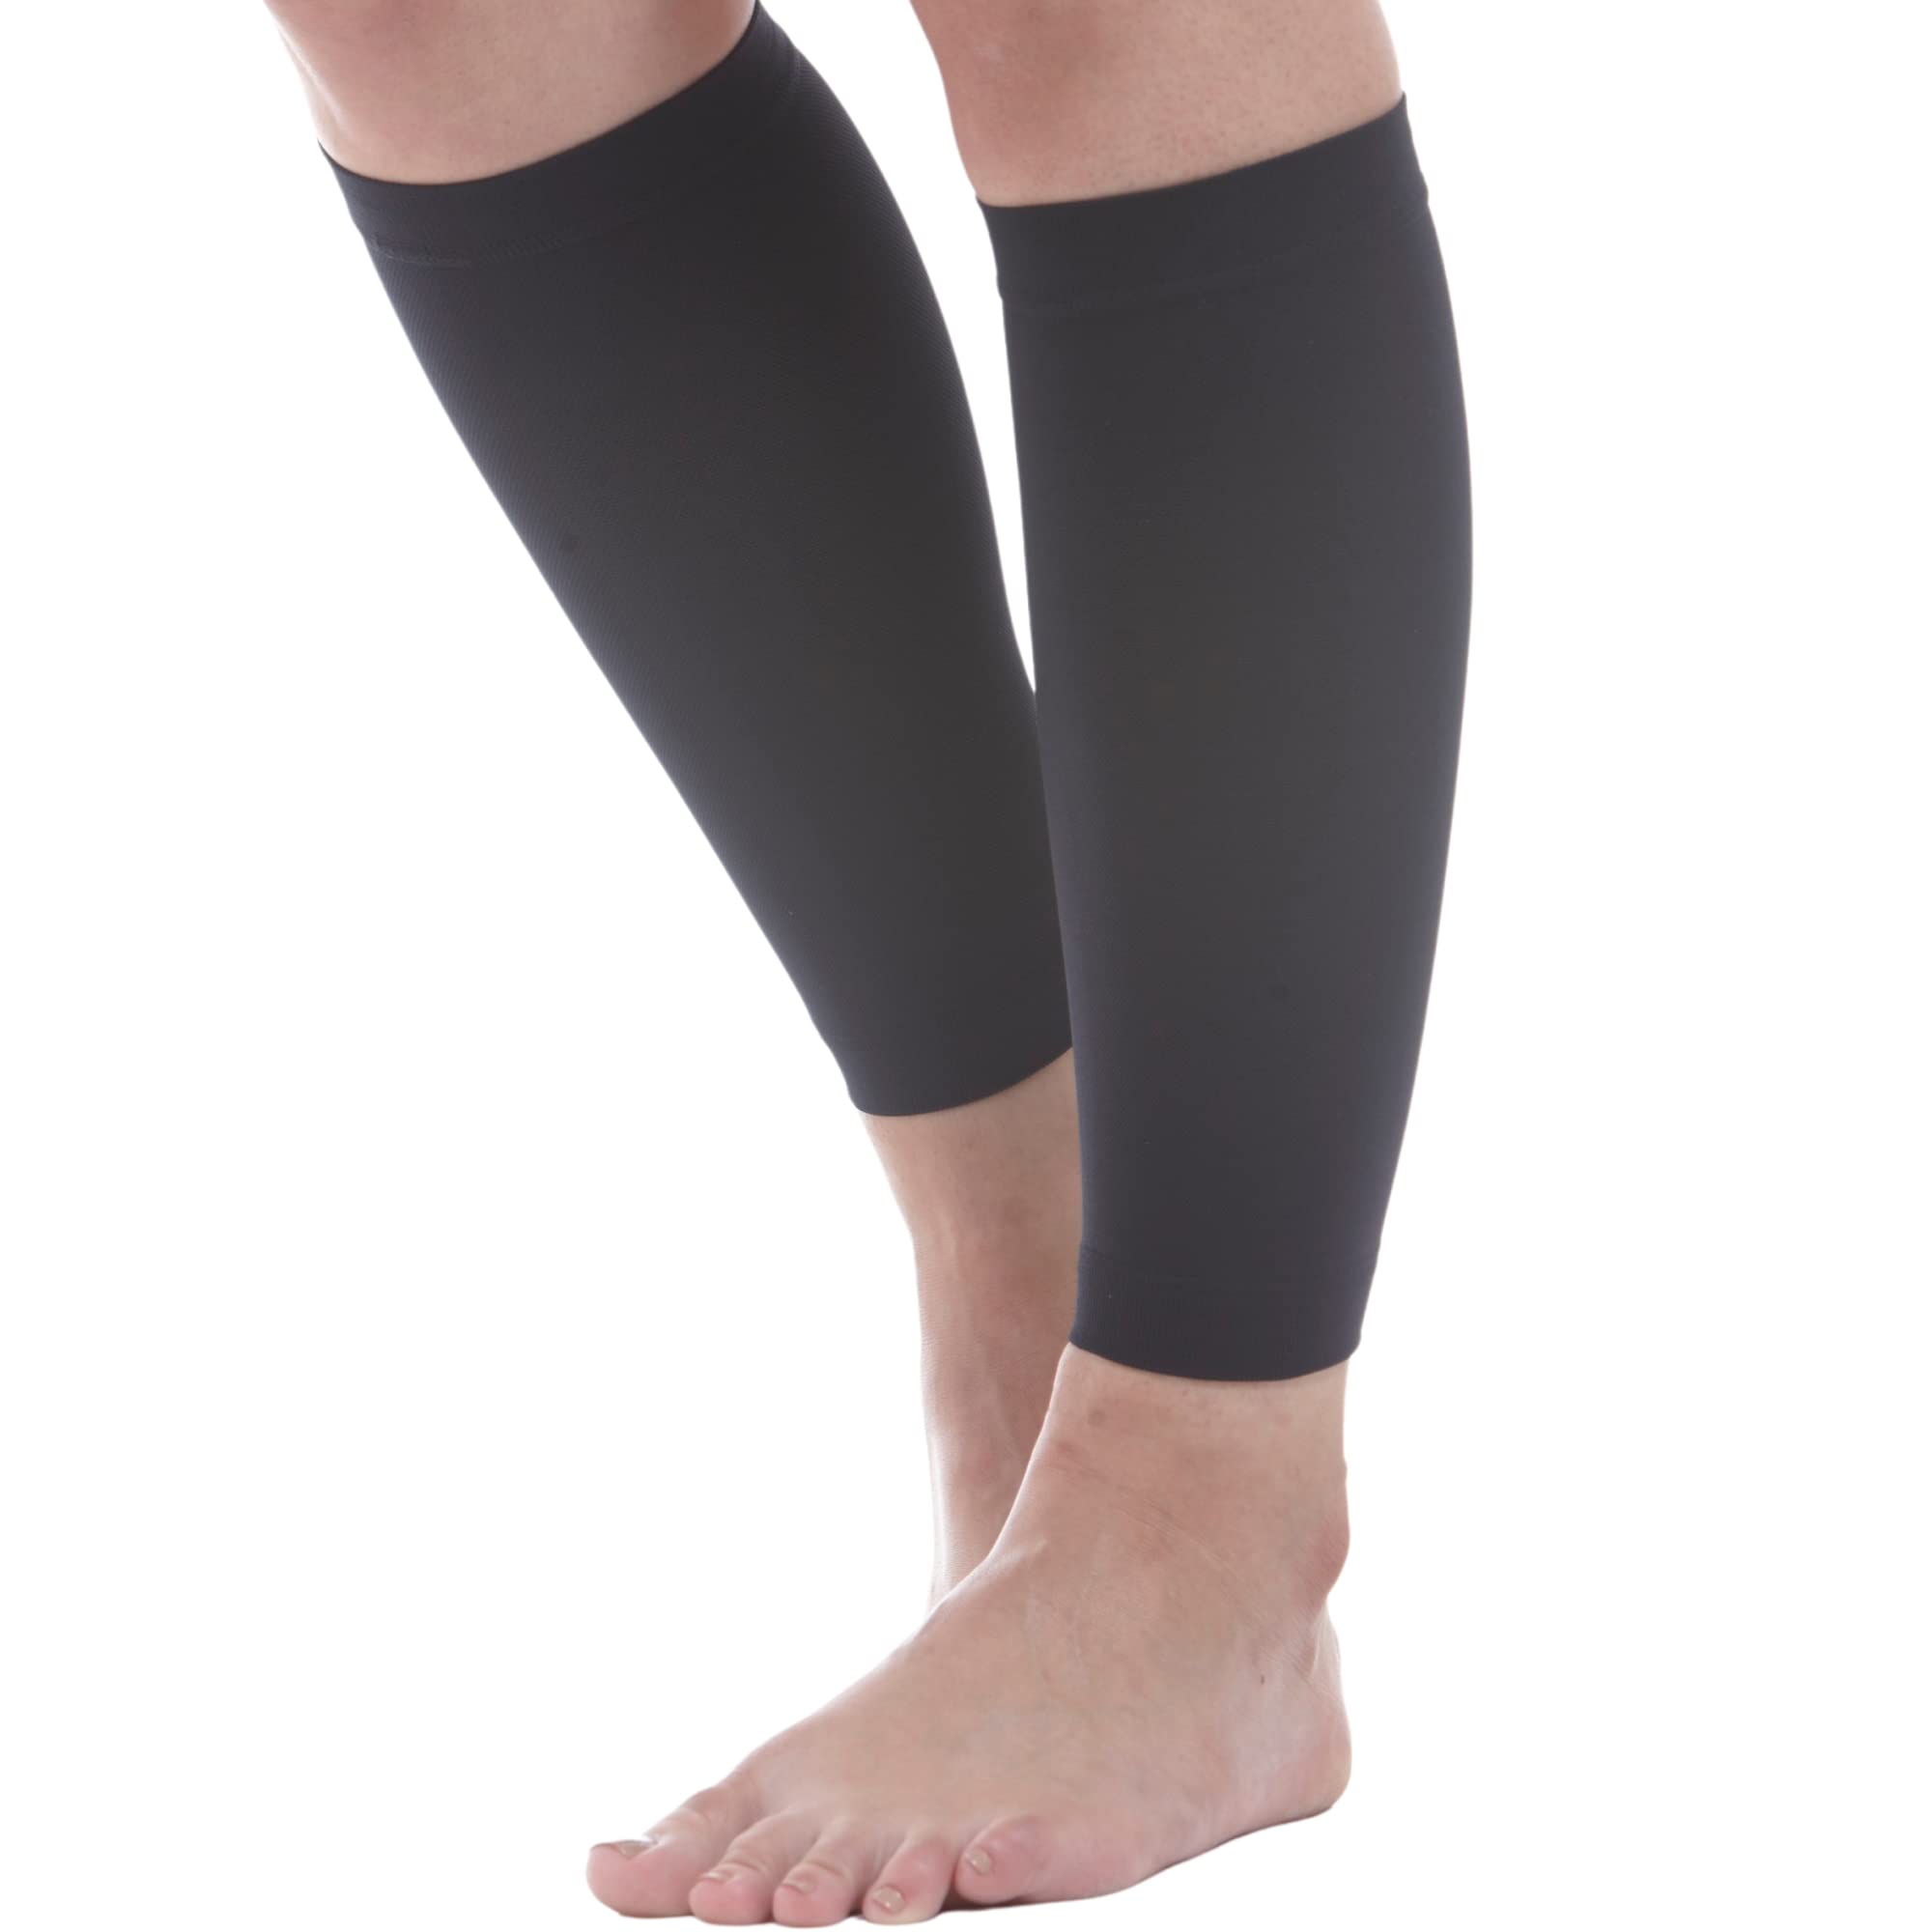 RONNOX Calf Compression Sleeve 3-Pairs (12-14 mmHg is Best Athletic &  Medical for Women,Travel,Running,Nurses,Flight,Edema CP19-M 